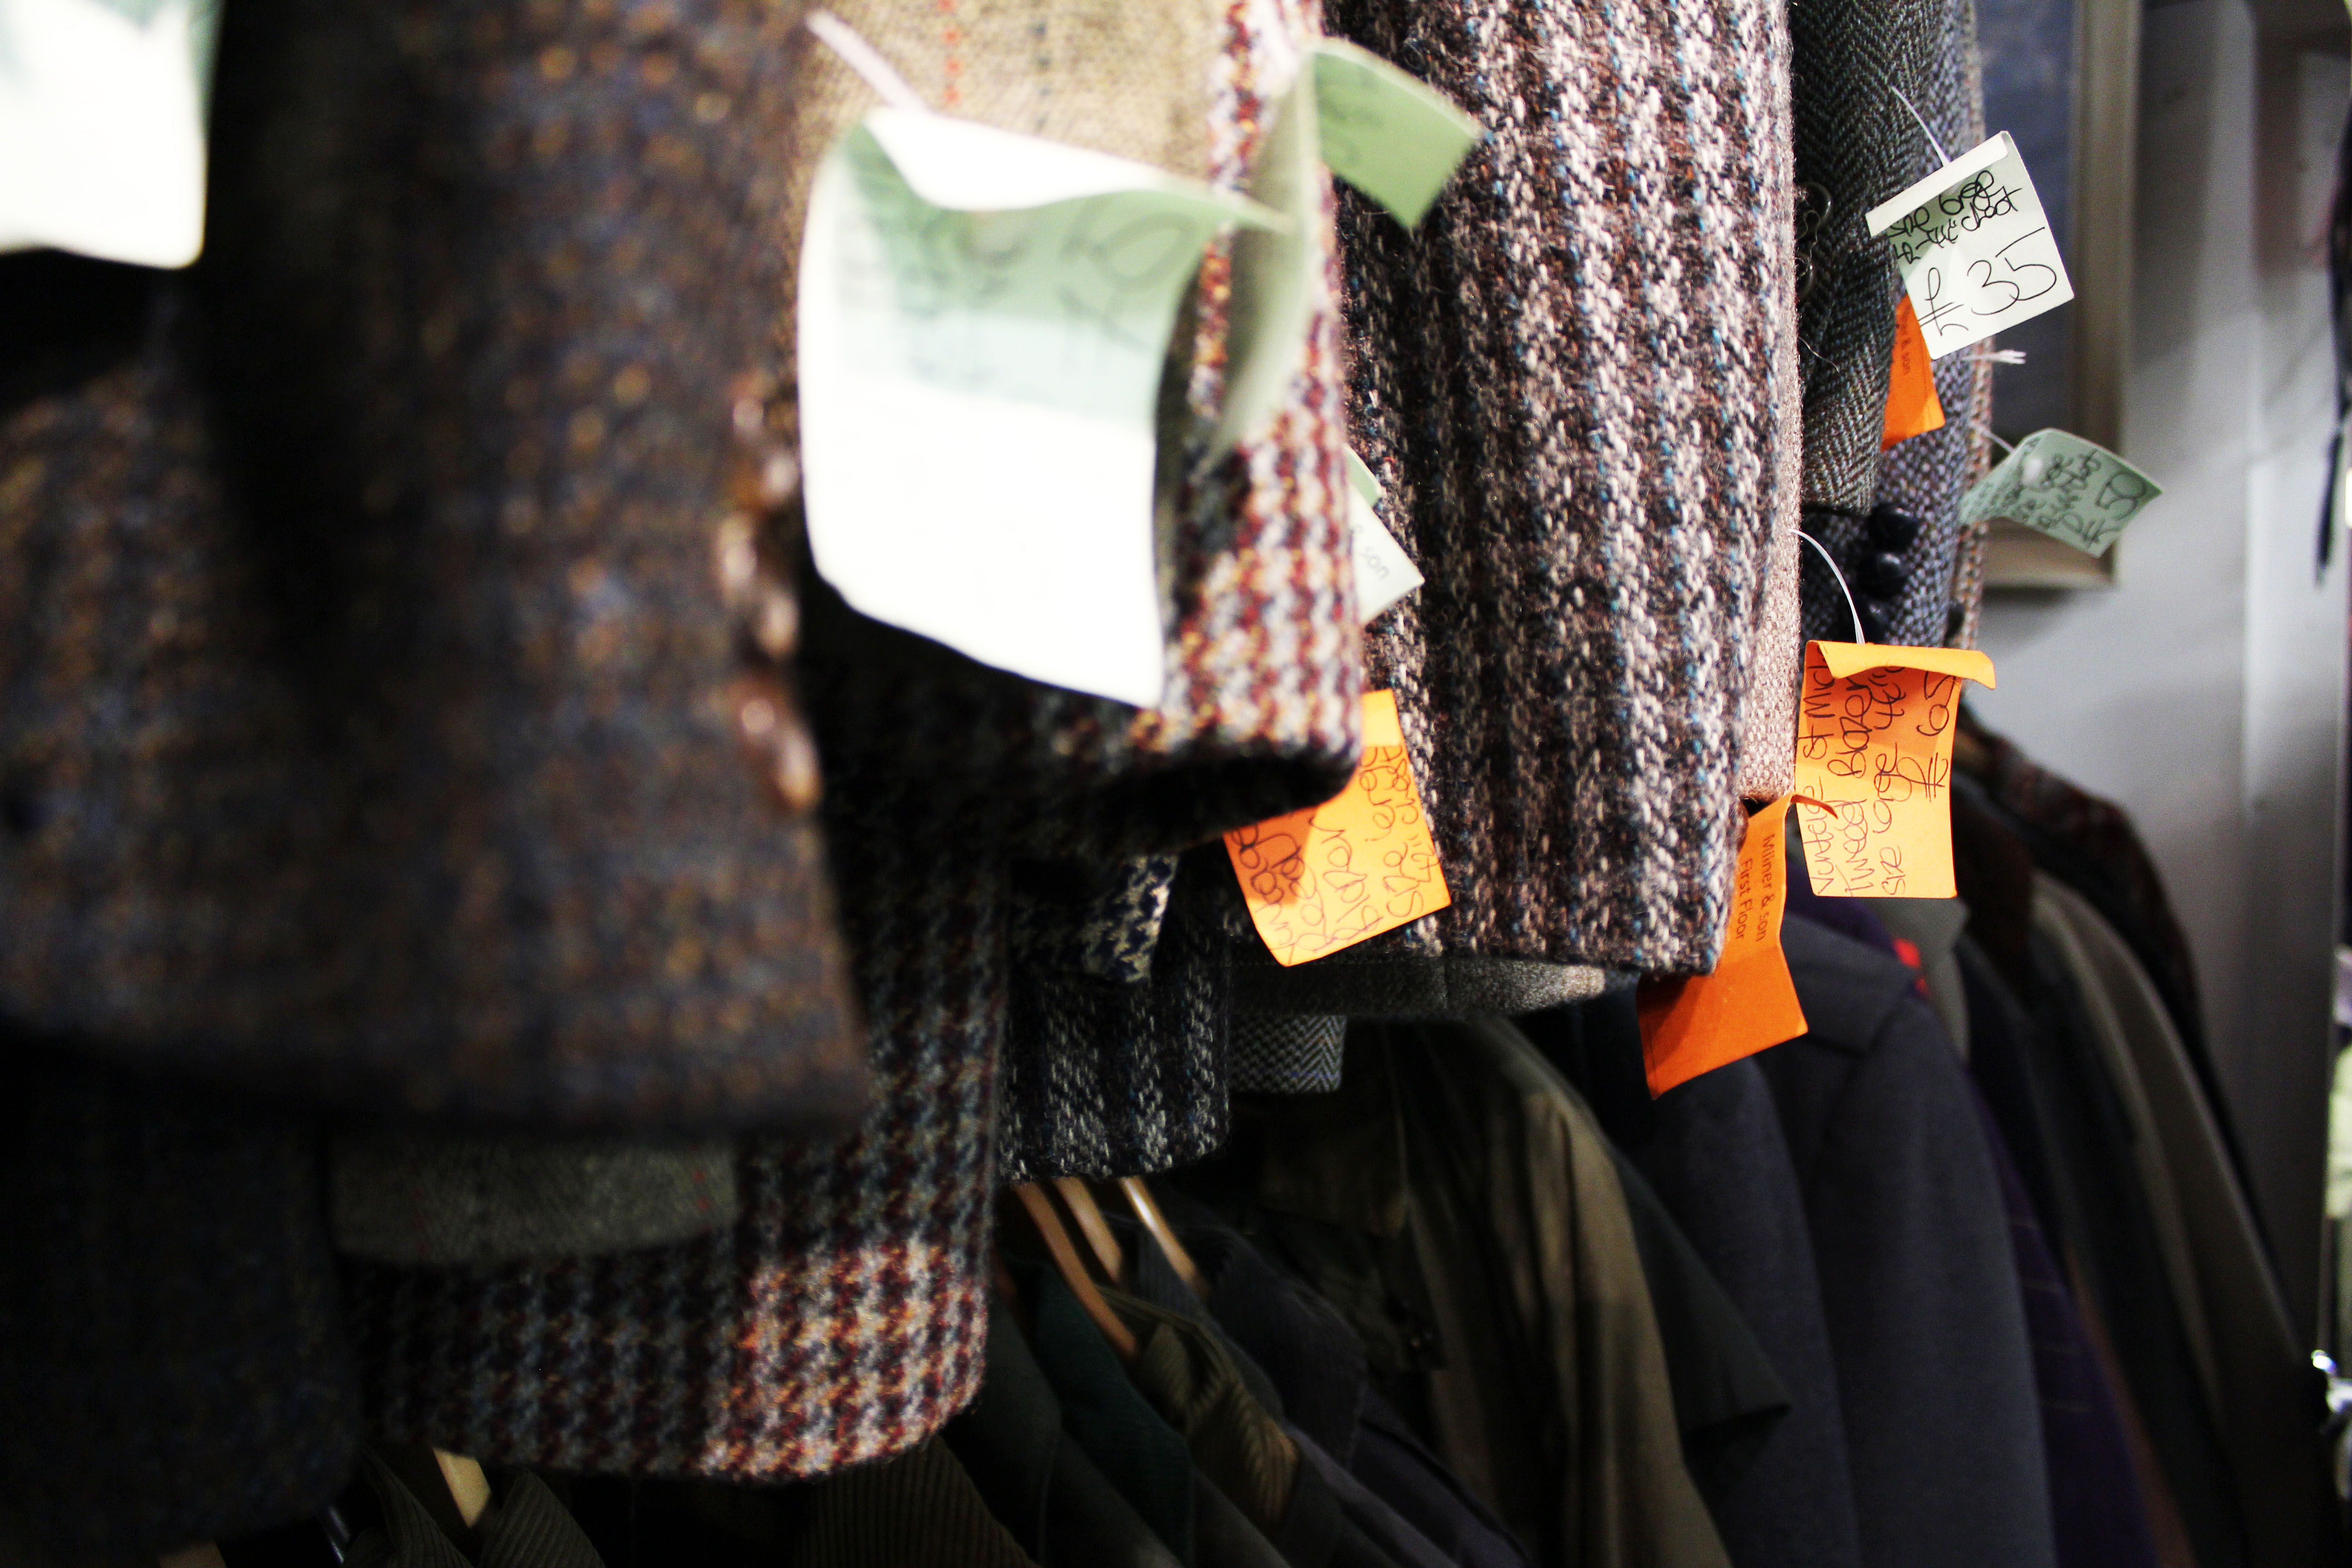 Image: Coats with price tags close up